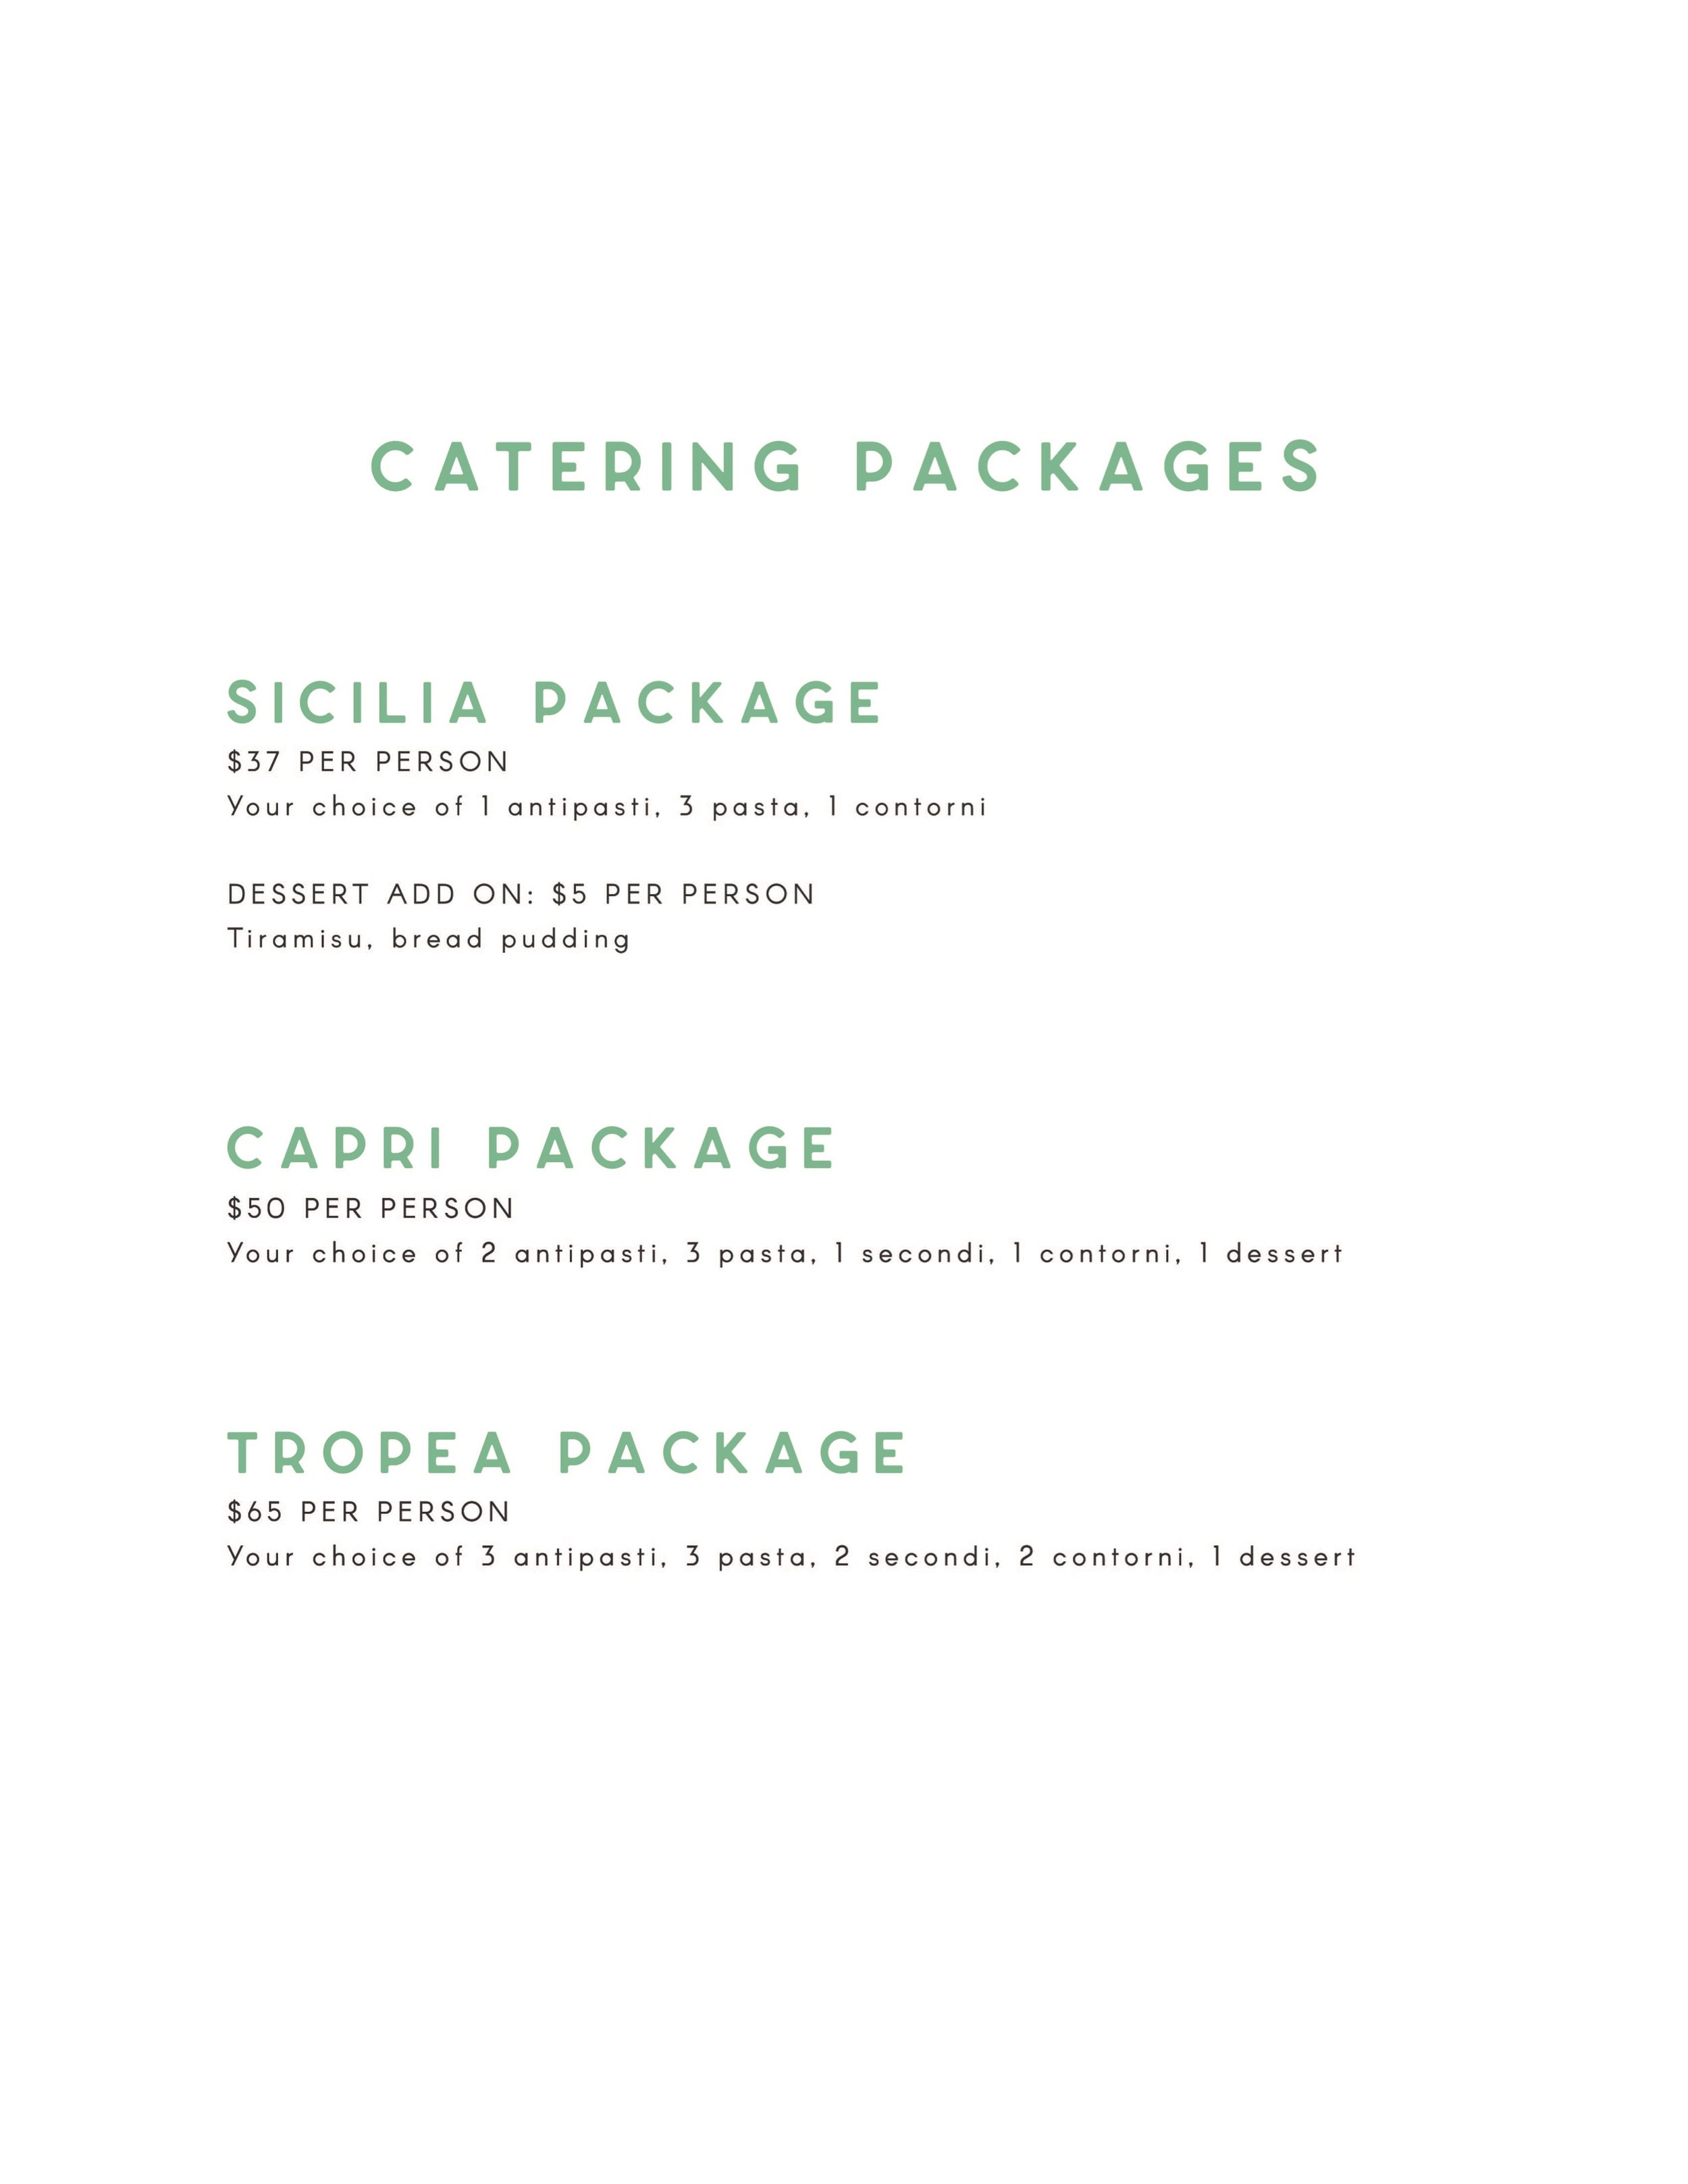 Cent'Anni Catering Packages.jpg